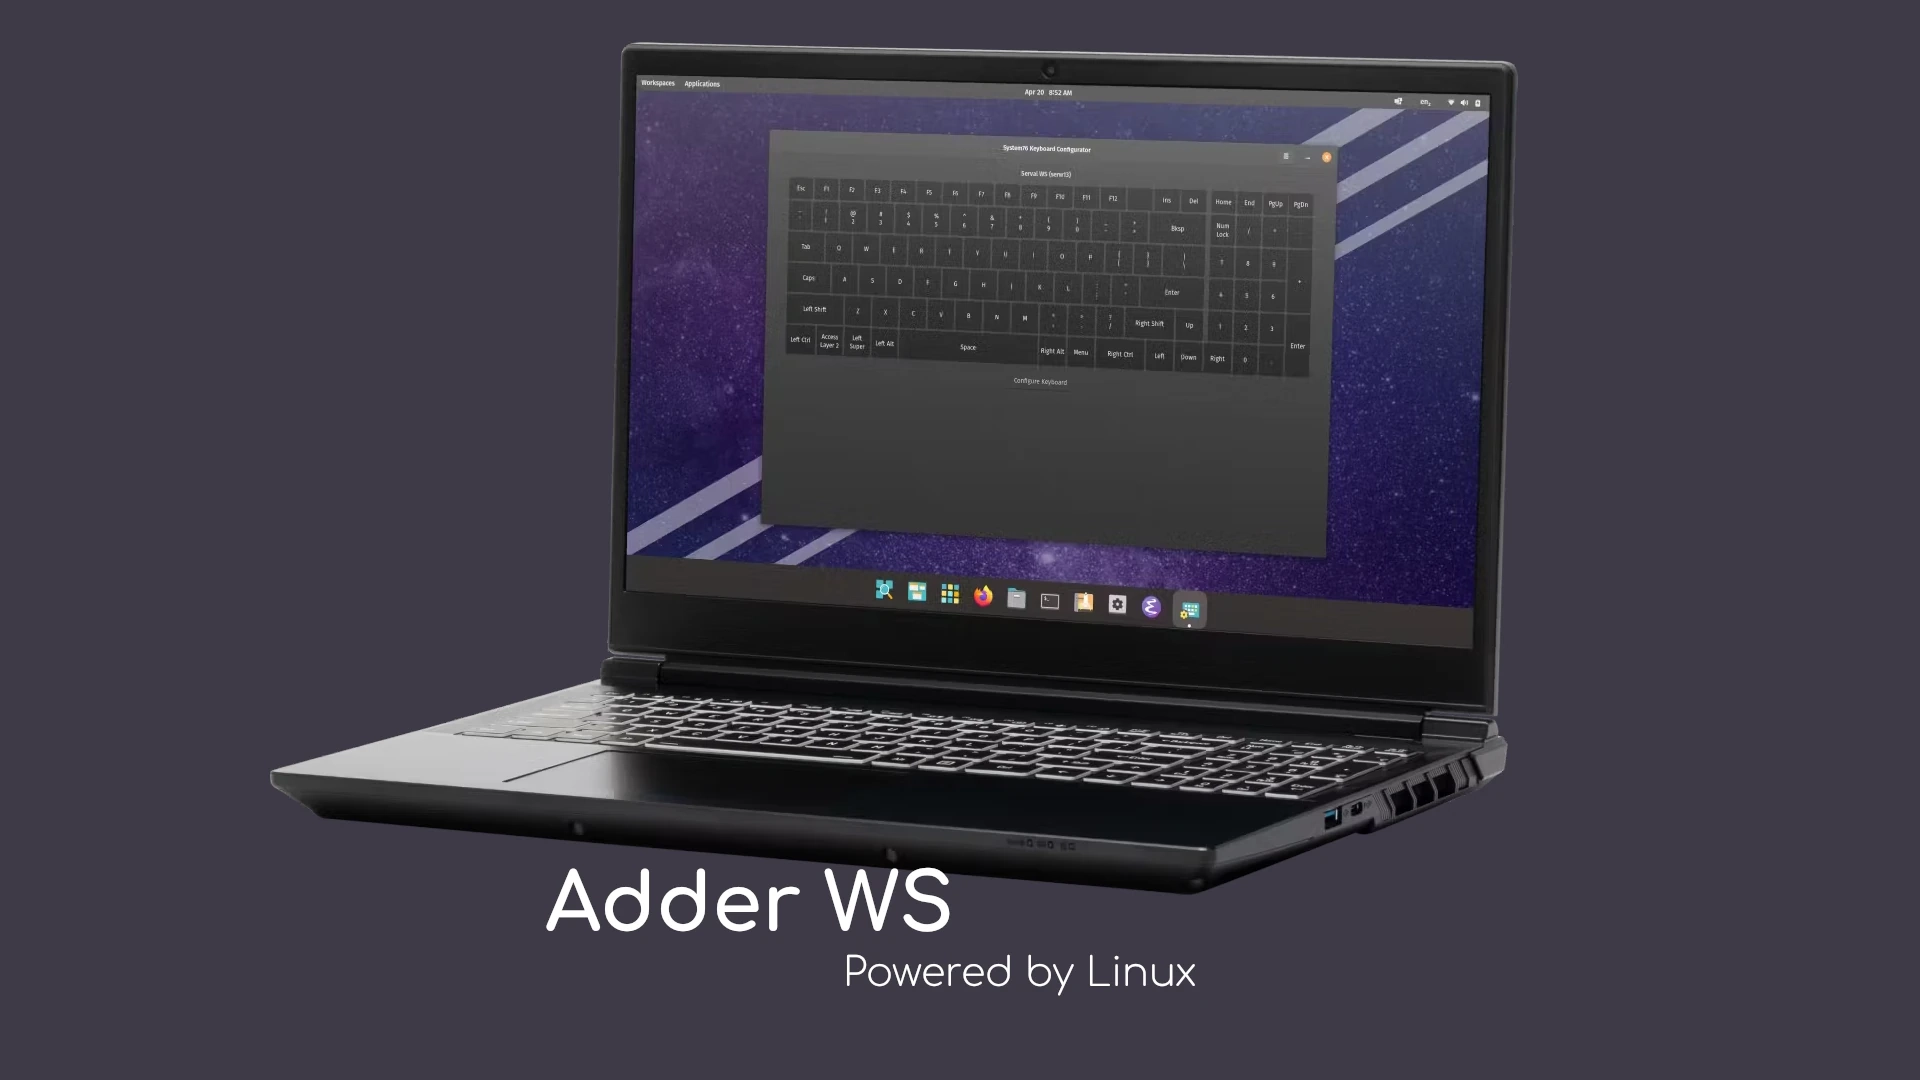 Introducing the Refreshed System76 Adder WS Linux Laptop with 14th Gen Intel CPU HX-Class